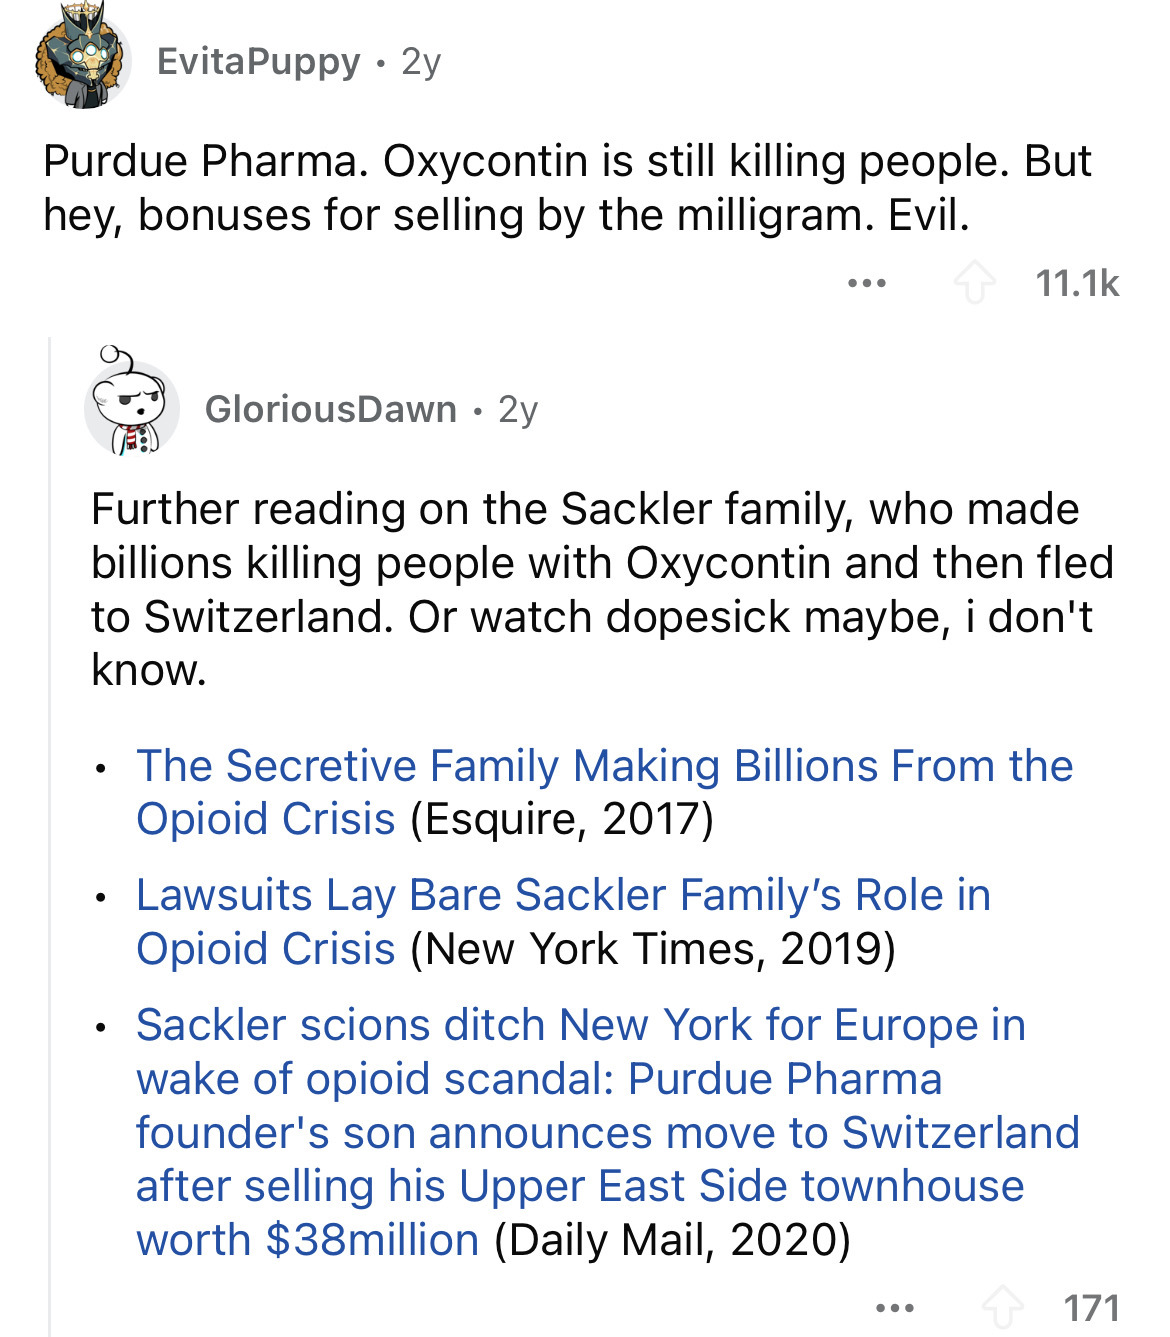 screenshot - Evita Puppy 2y . Purdue Pharma. Oxycontin is still killing people. But hey, bonuses for selling by the milligram. Evil. GloriousDawn 2y Further reading on the Sackler family, who made billions killing people with Oxycontin and then fled to Sw